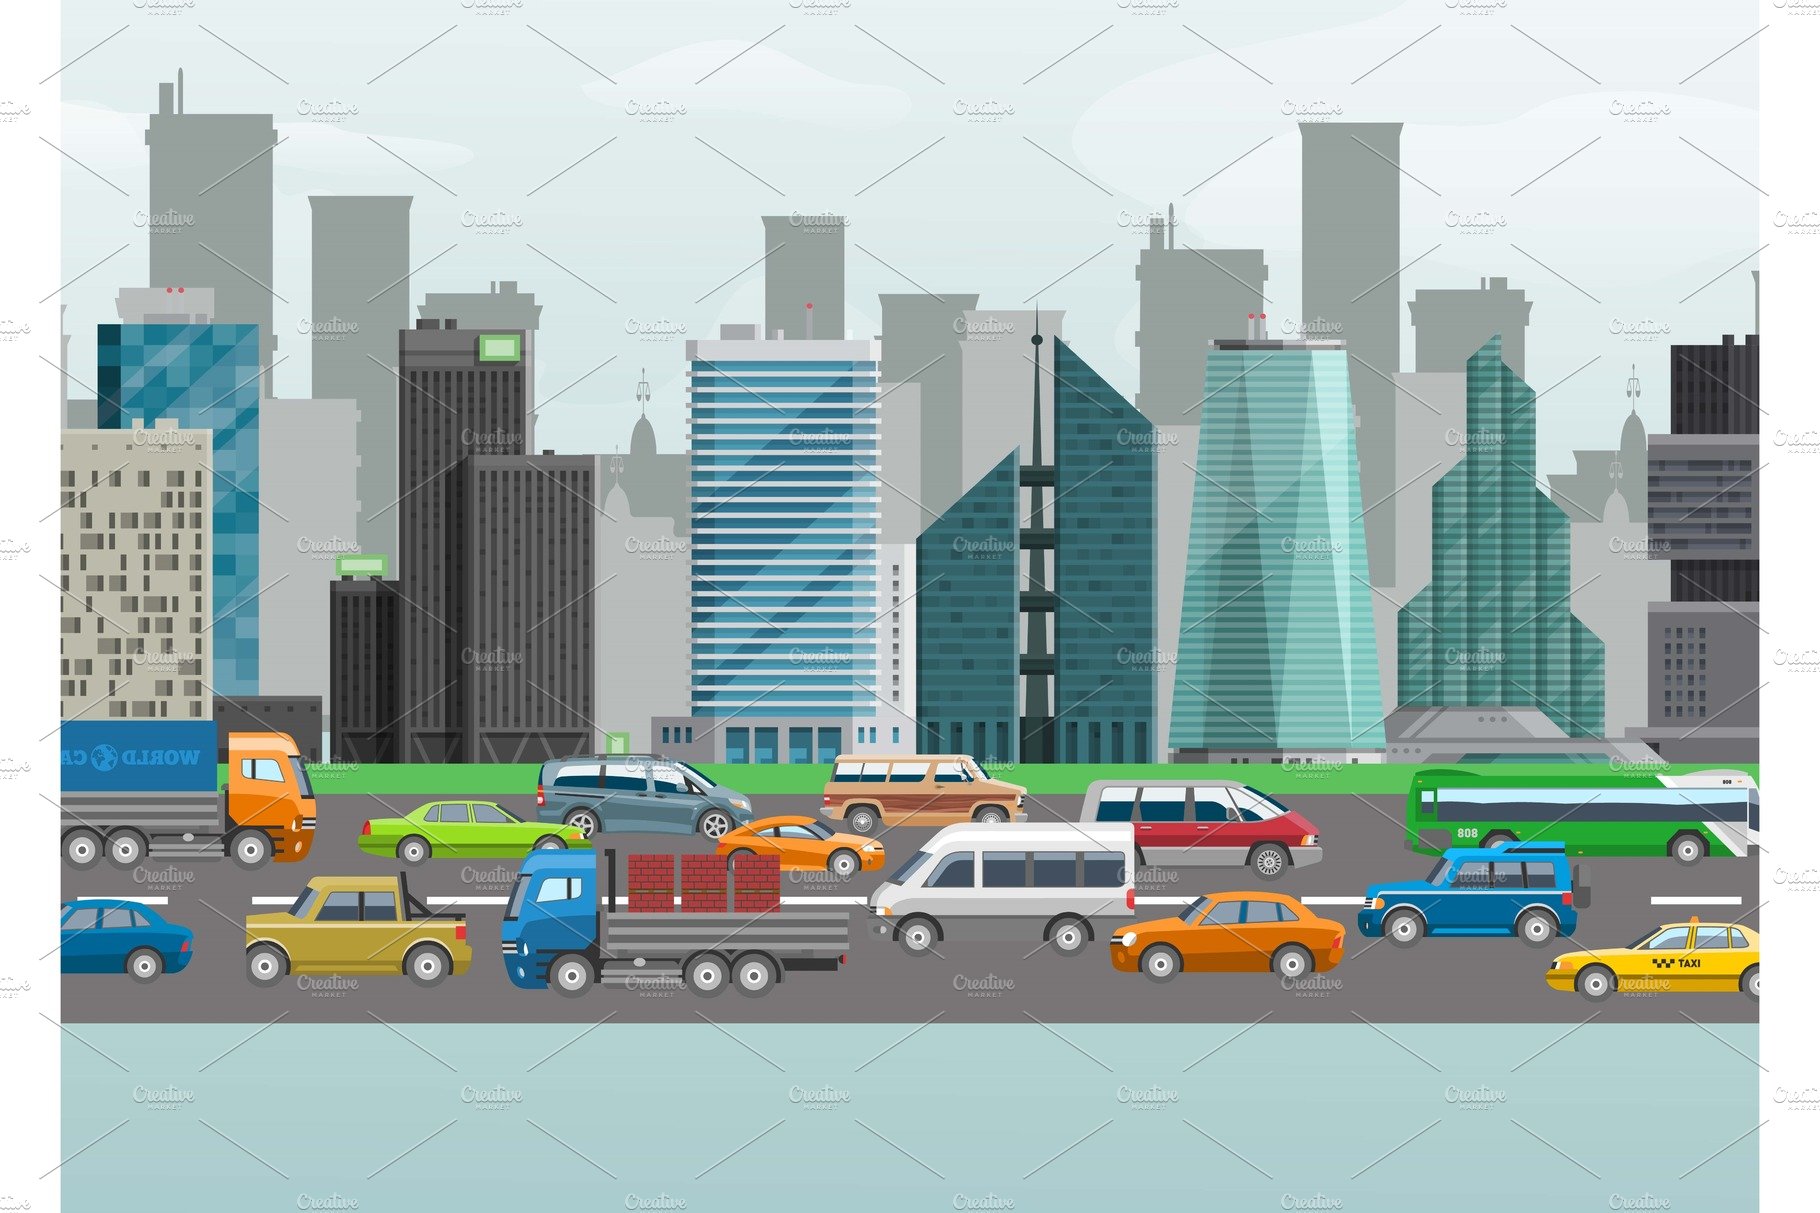 City traffic street vector cover image.